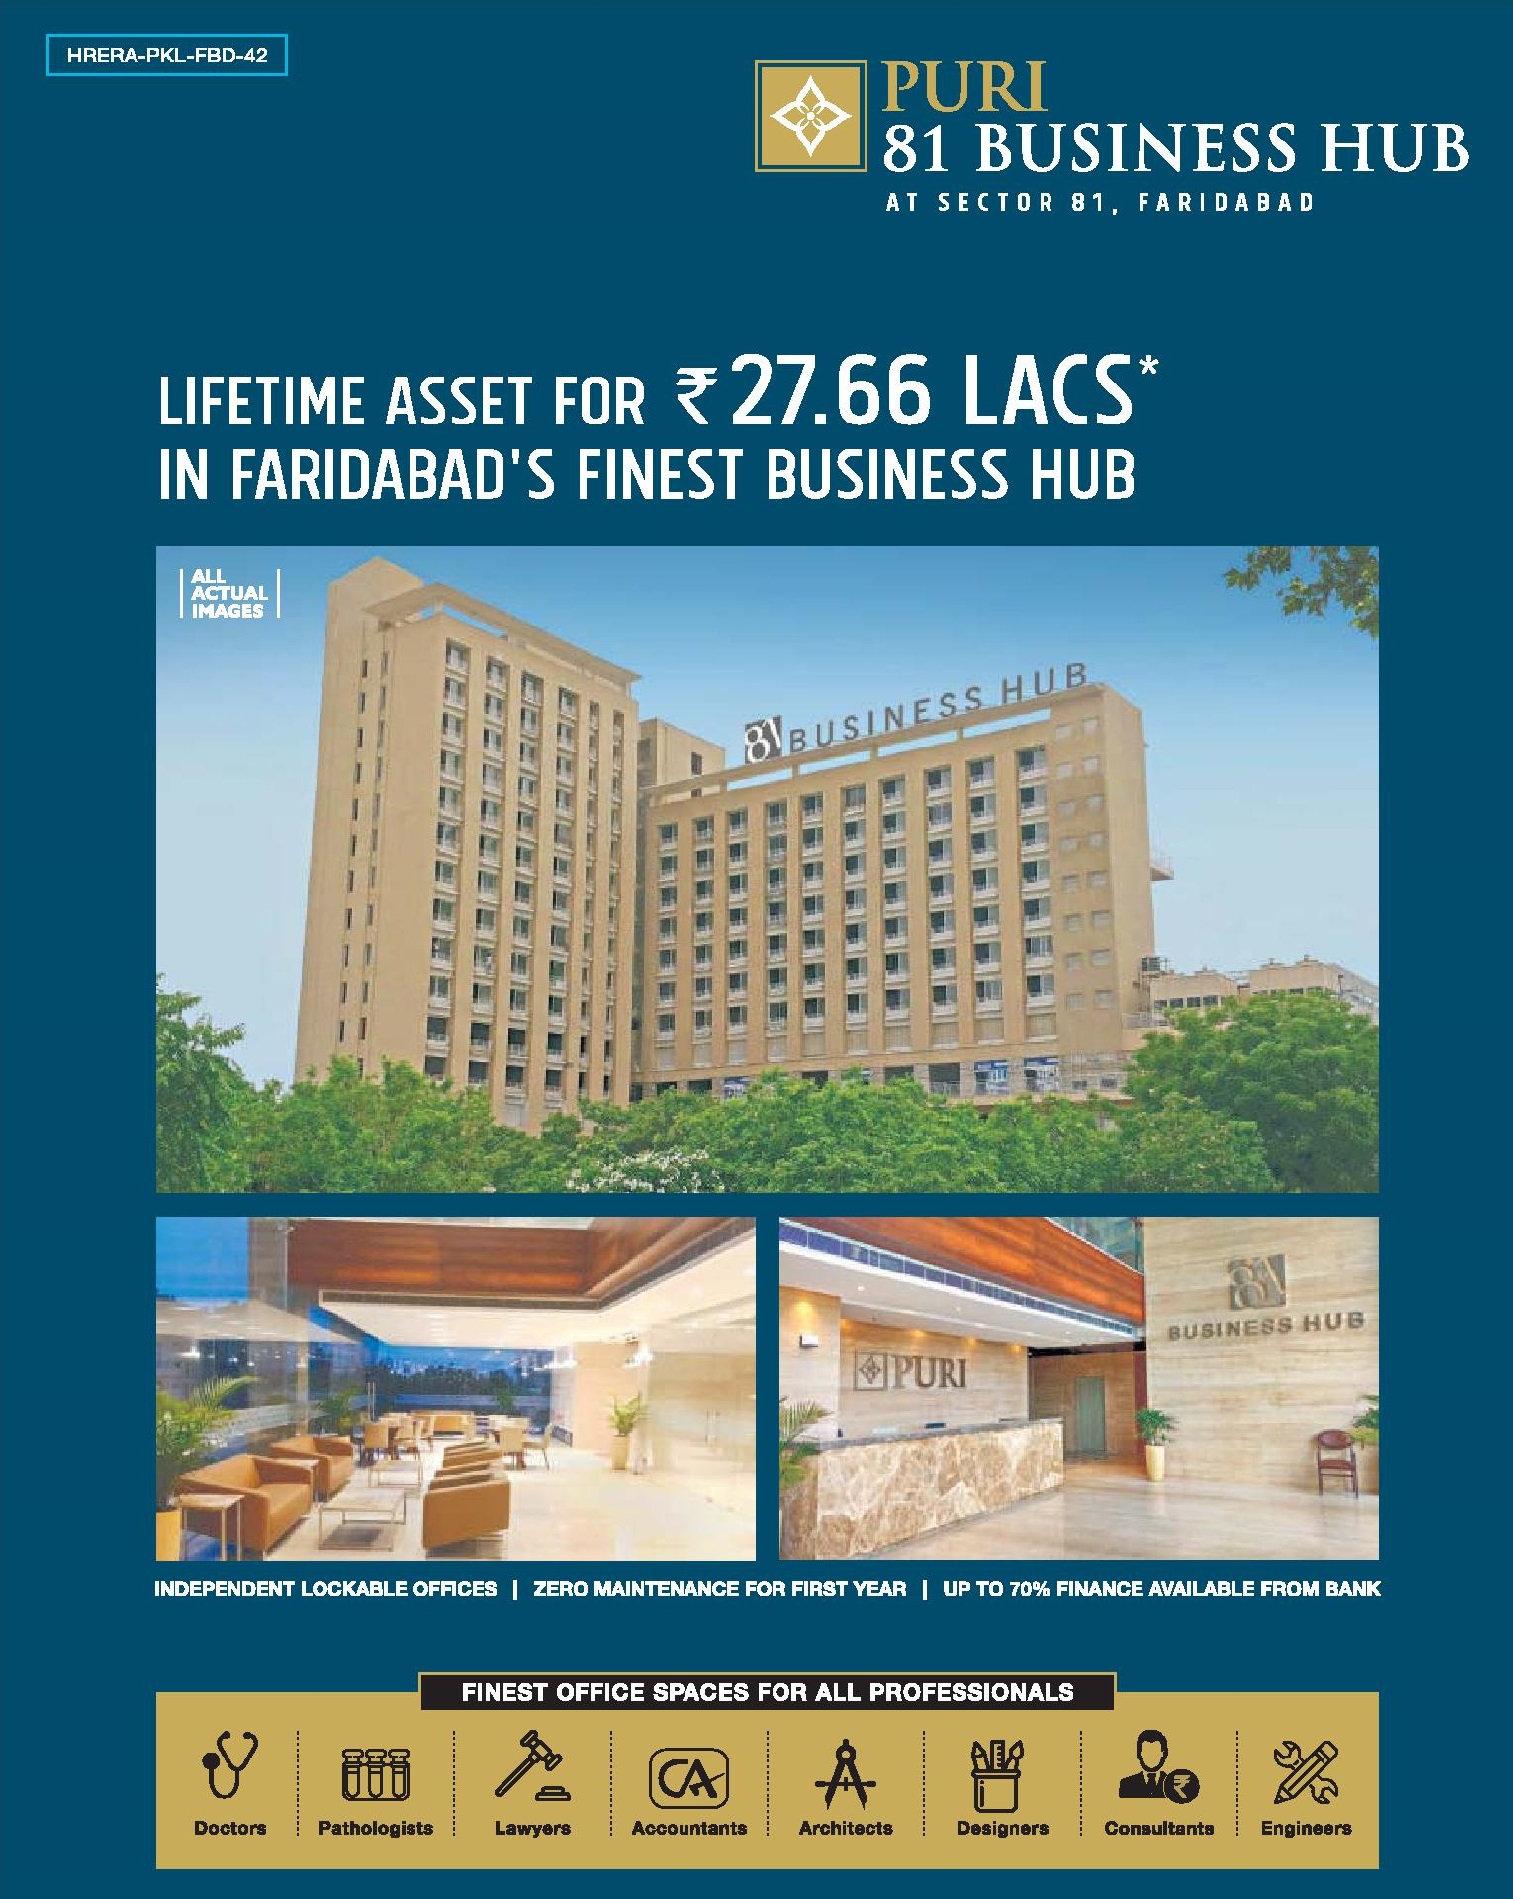 Lifetime asset for Rs. 27.66 lakhs at Puri 81 Business hub in Faridabad Update